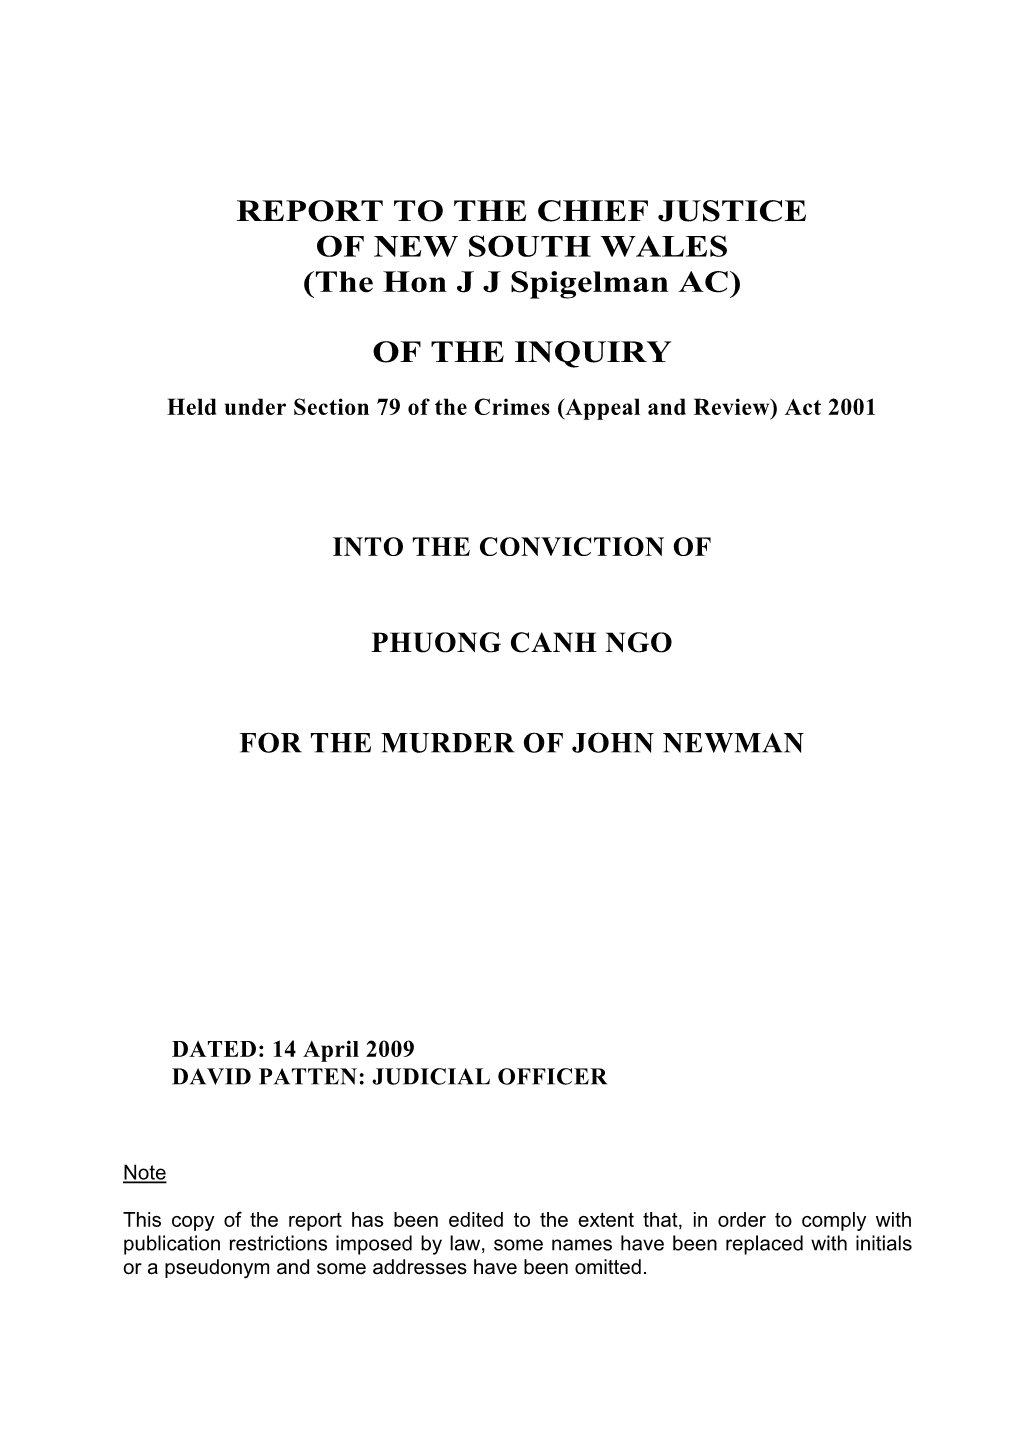 REPORT to the CHIEF JUSTICE of NEW SOUTH WALES (The Hon J J Spigelman AC)